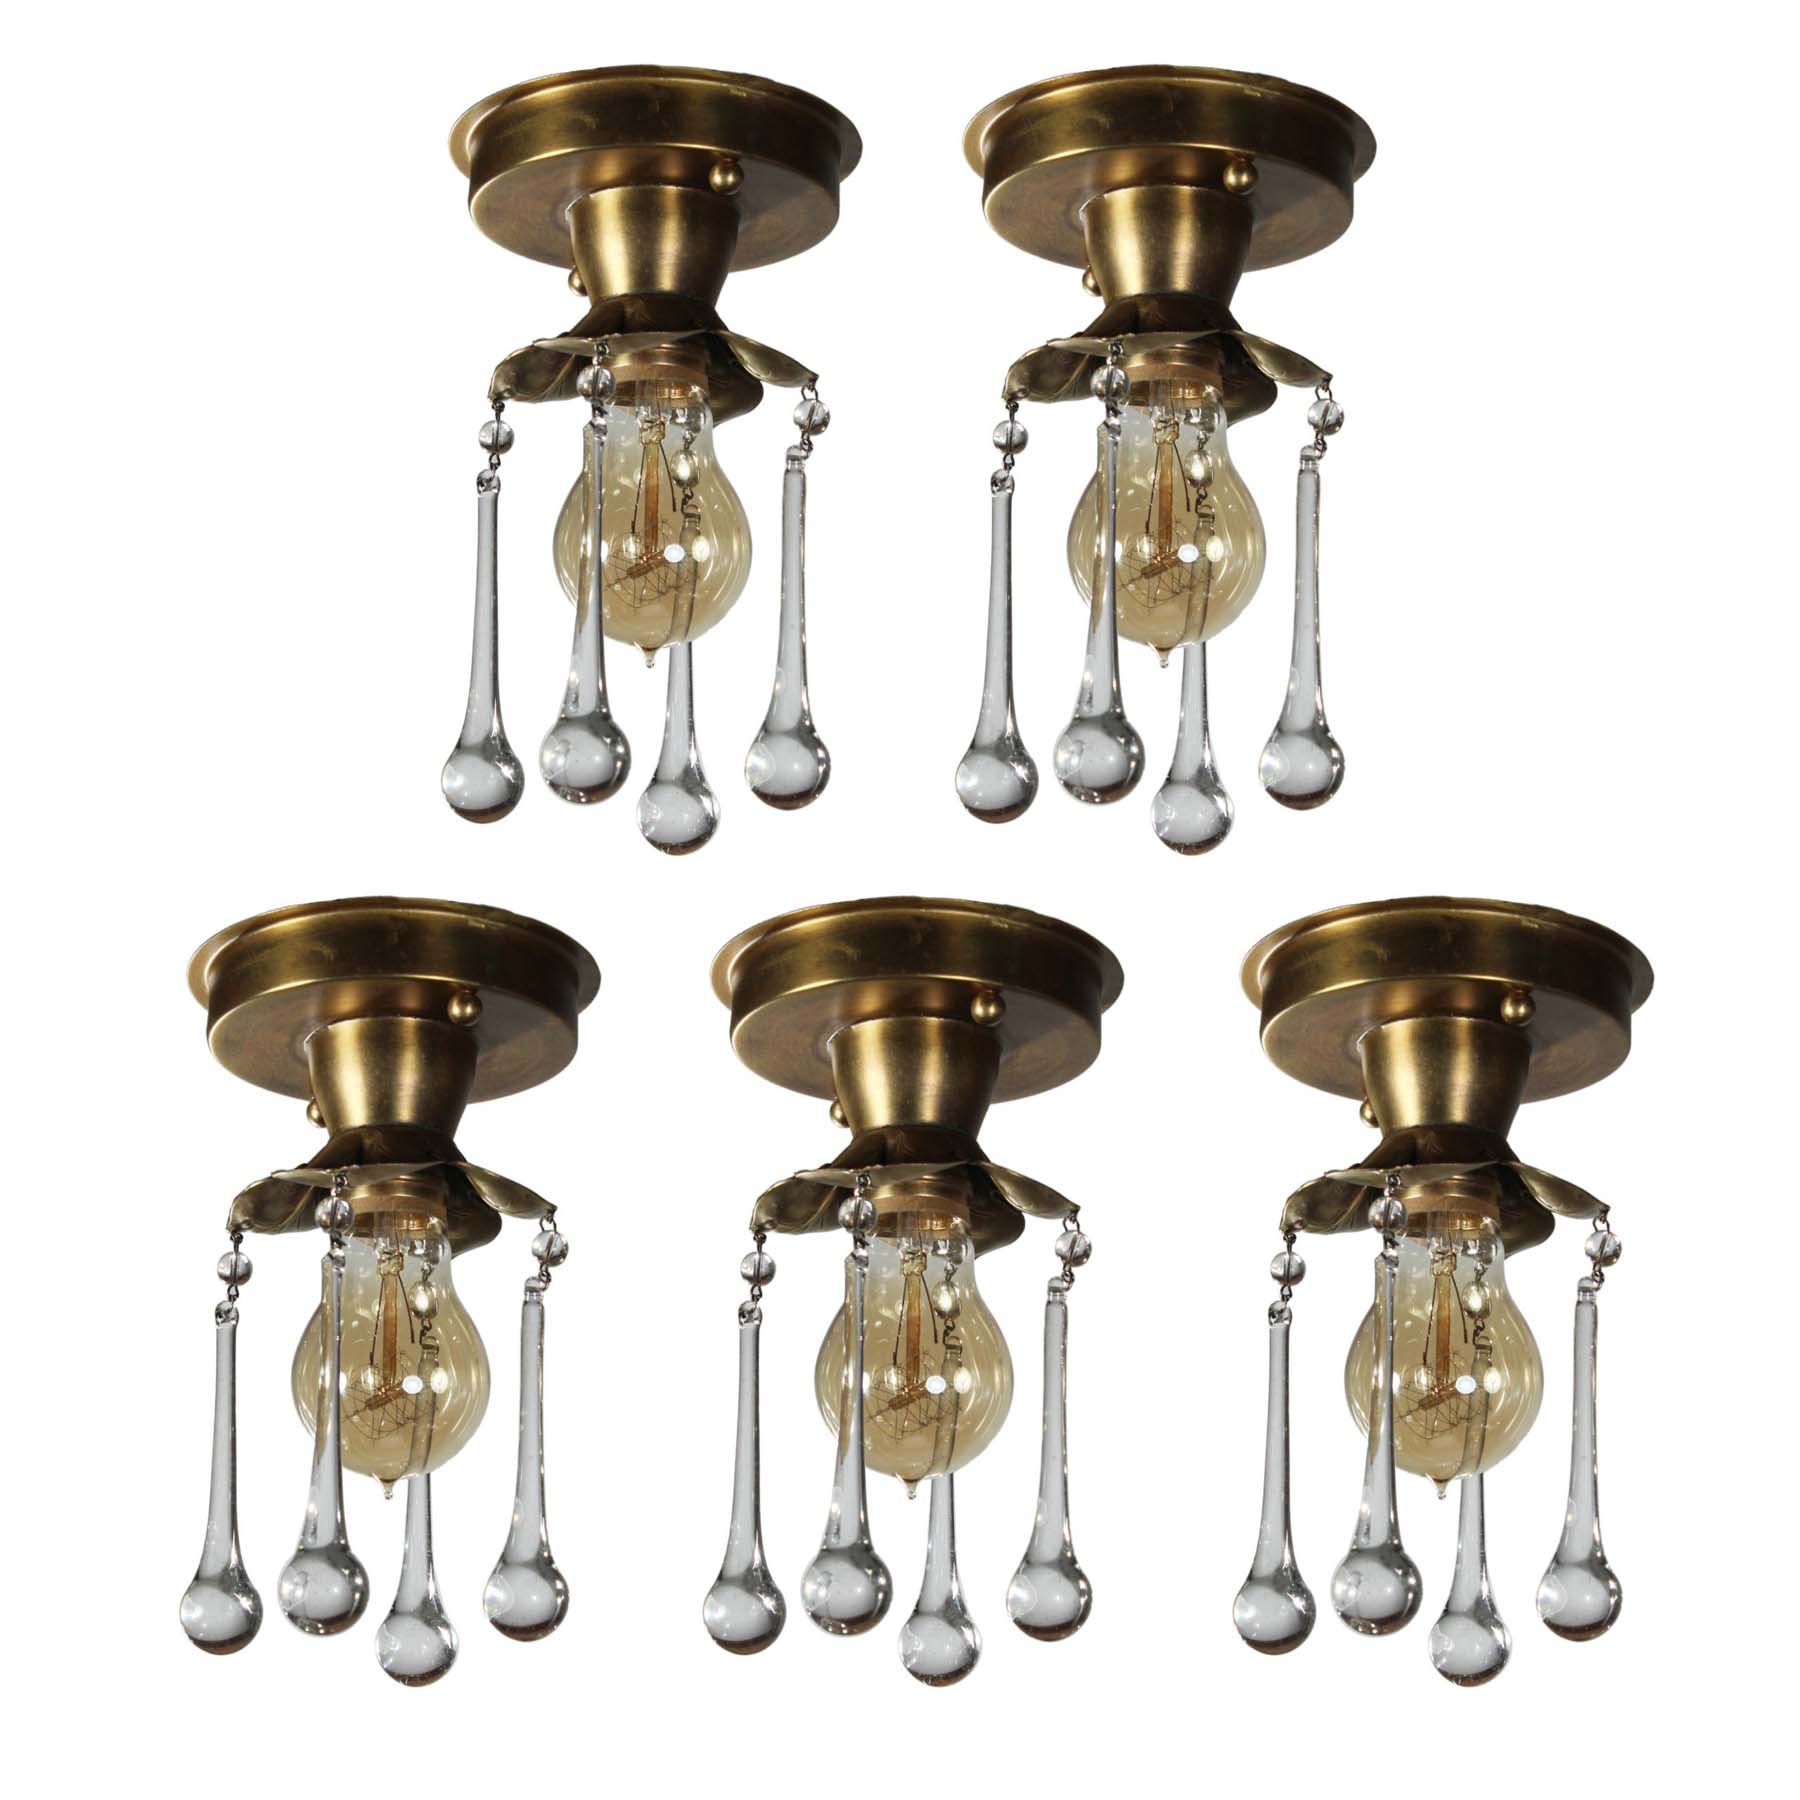 Brass Exposed Bulb Flush-Mount Lights with Teardrop Prisms, Antique Lighting-0